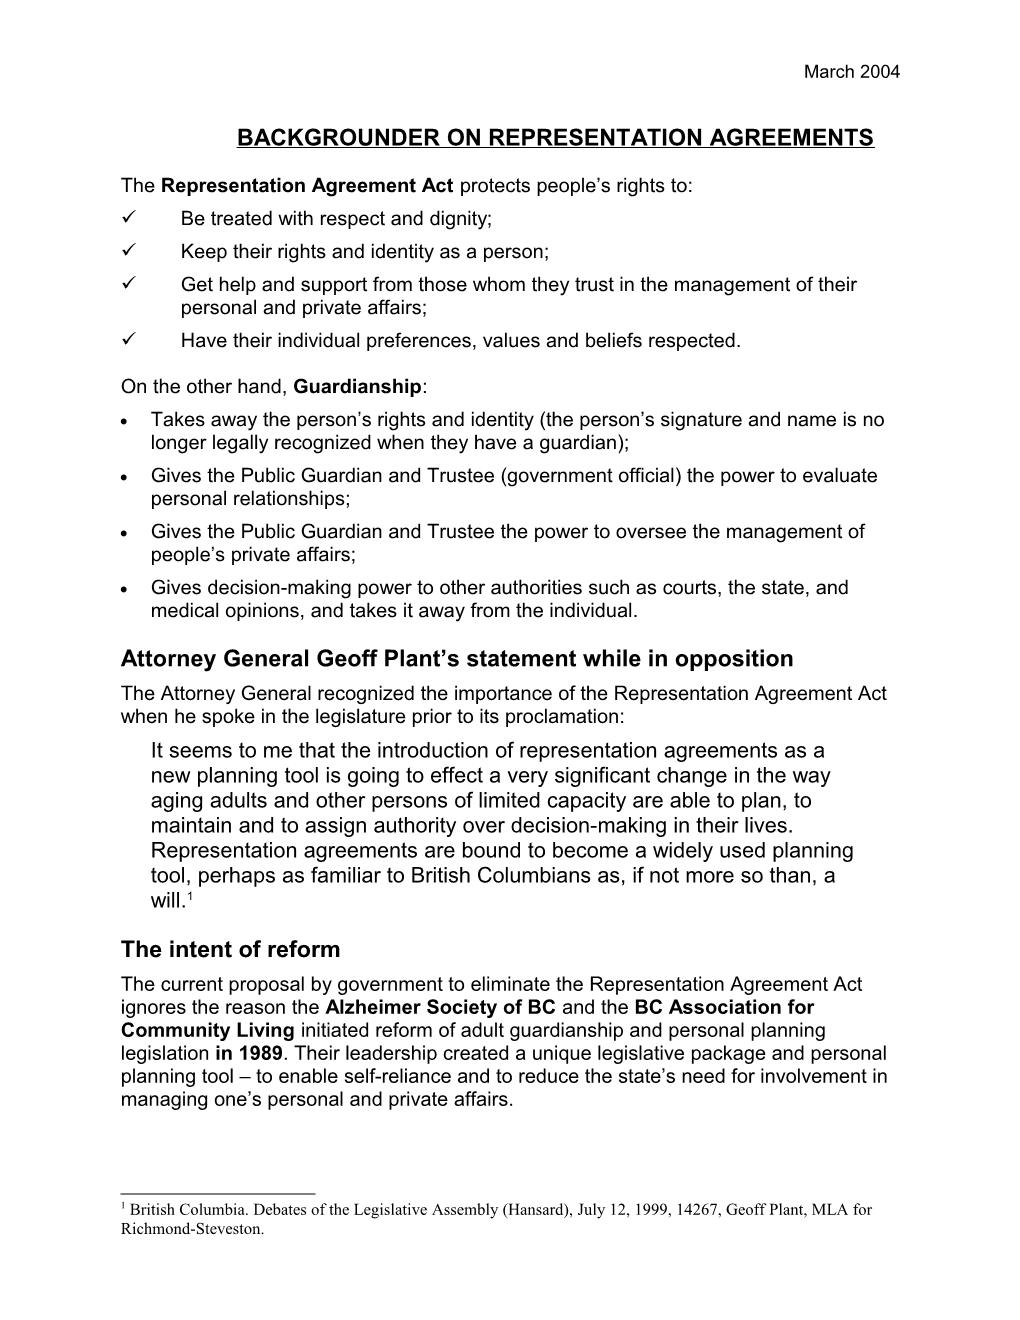 Background on Representation Agreements